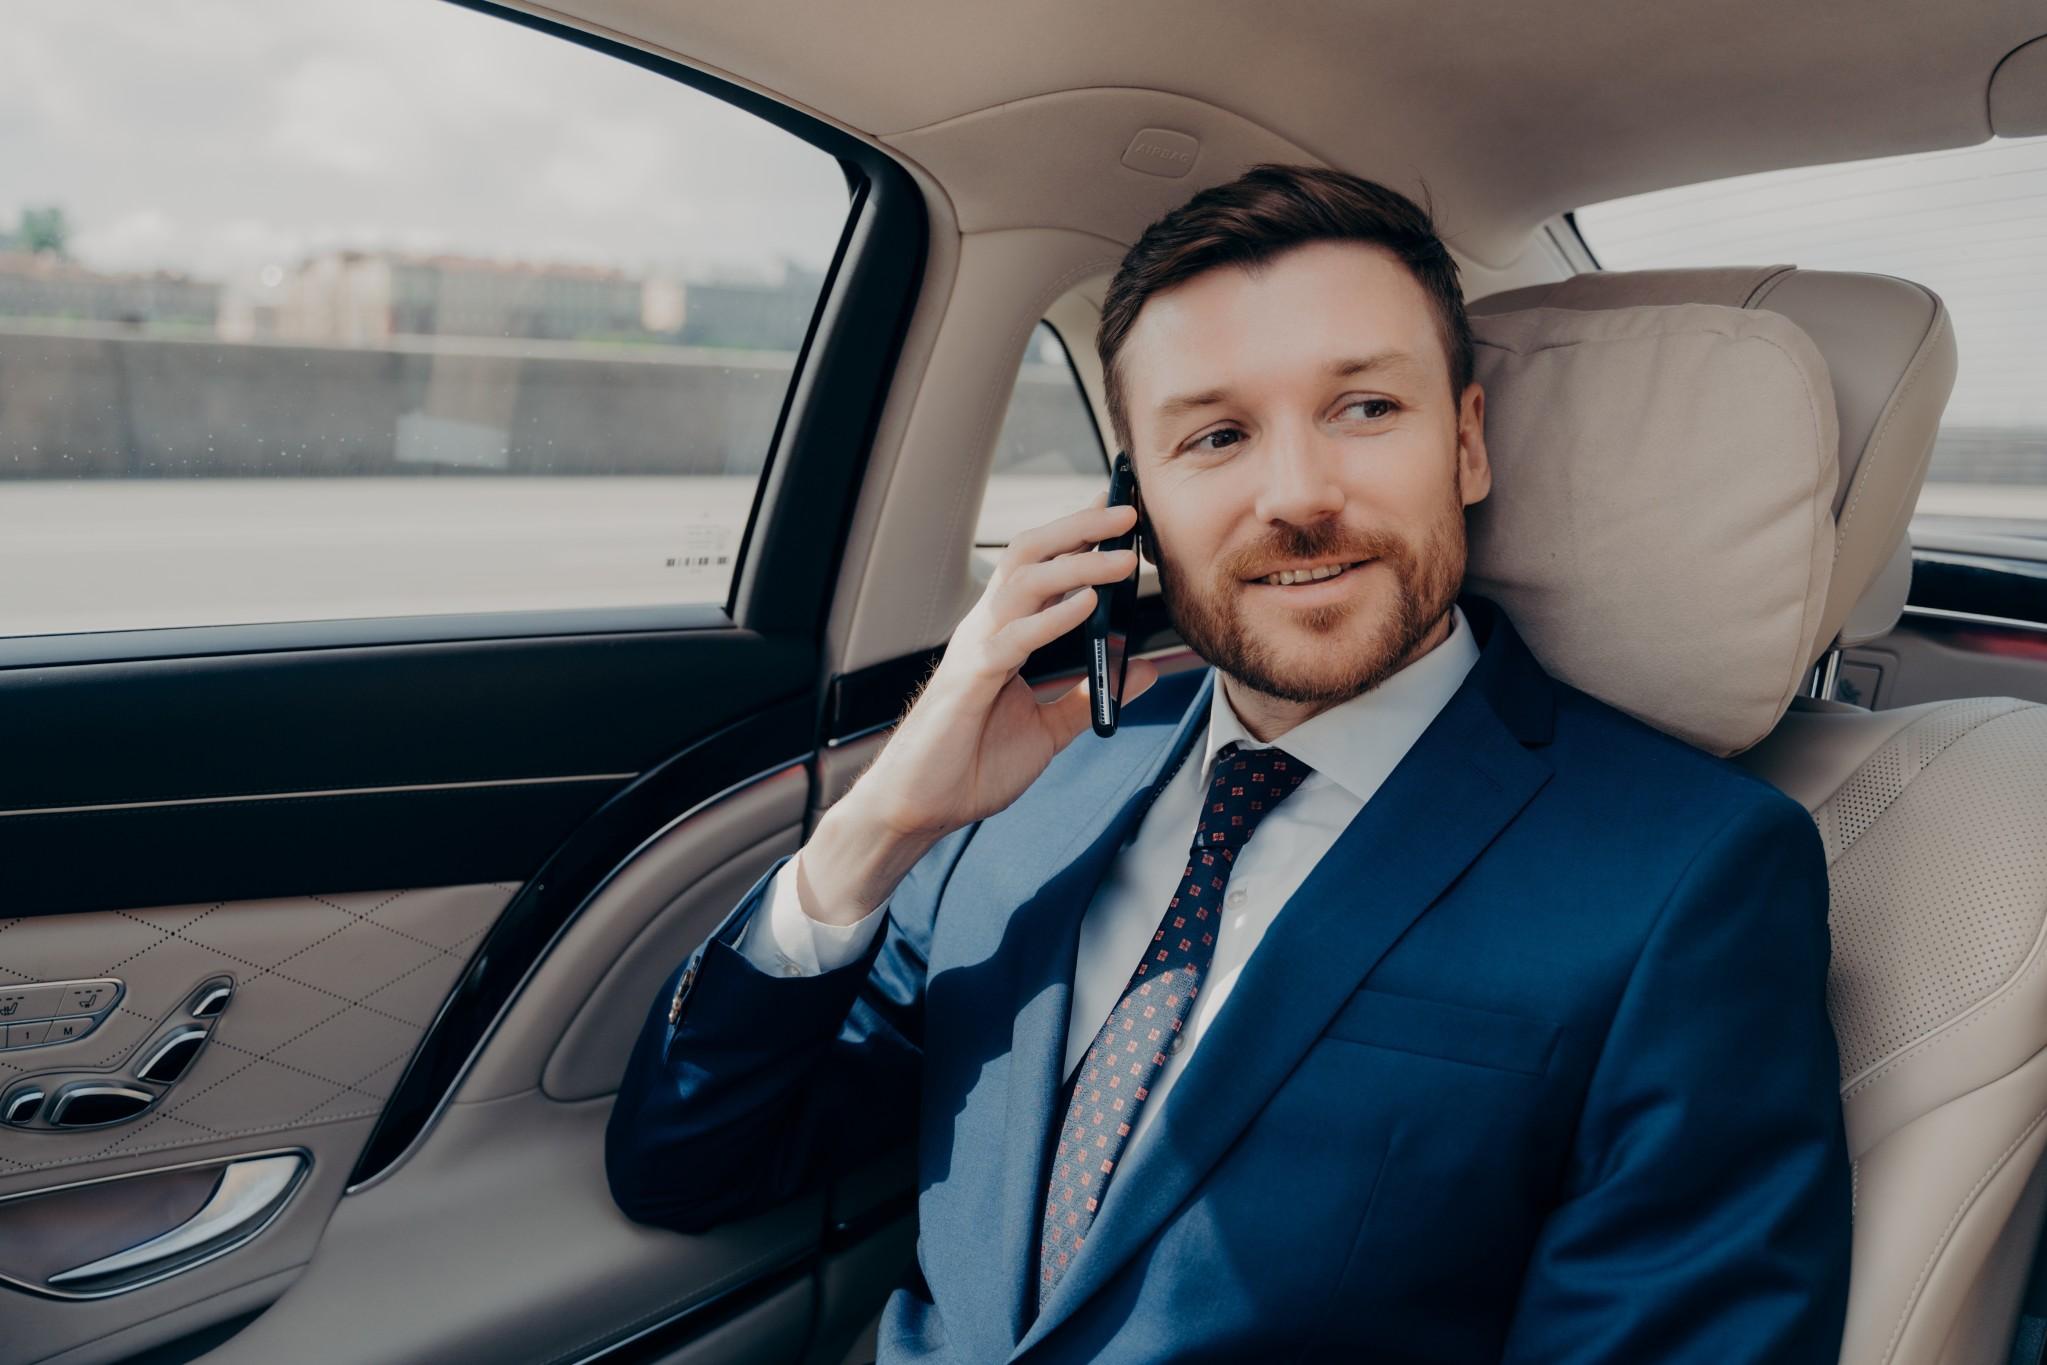 man in a business suit talking on a cell phone in a car